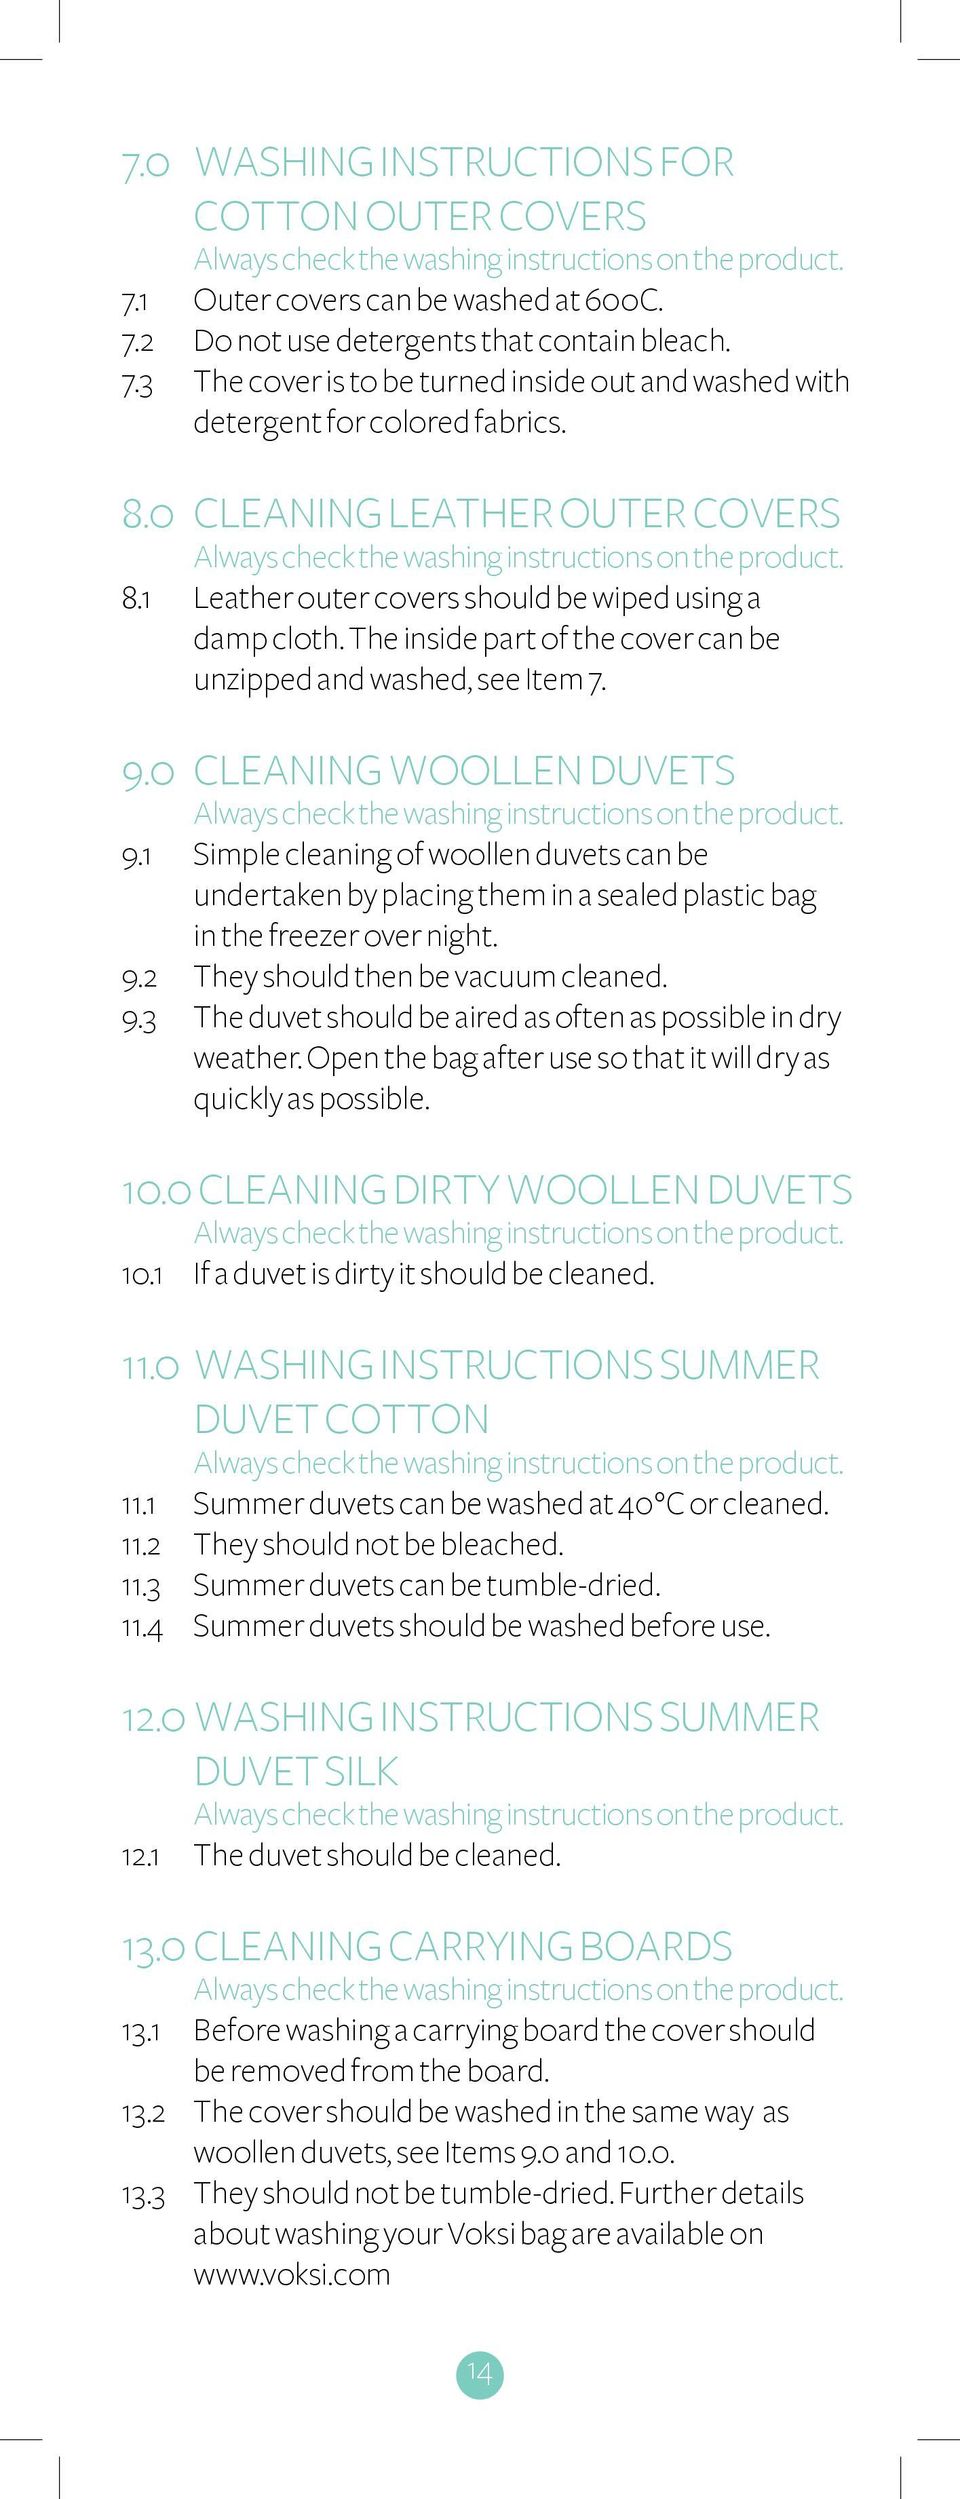 The inside part of the cover can be unzipped and washed, see Item 7. 9.0 Cleaning woollen duvets Always check the washing instructions on the product. 9.1 Simple cleaning of woollen duvets can be undertaken by placing them in a sealed plastic bag in the freezer over night.